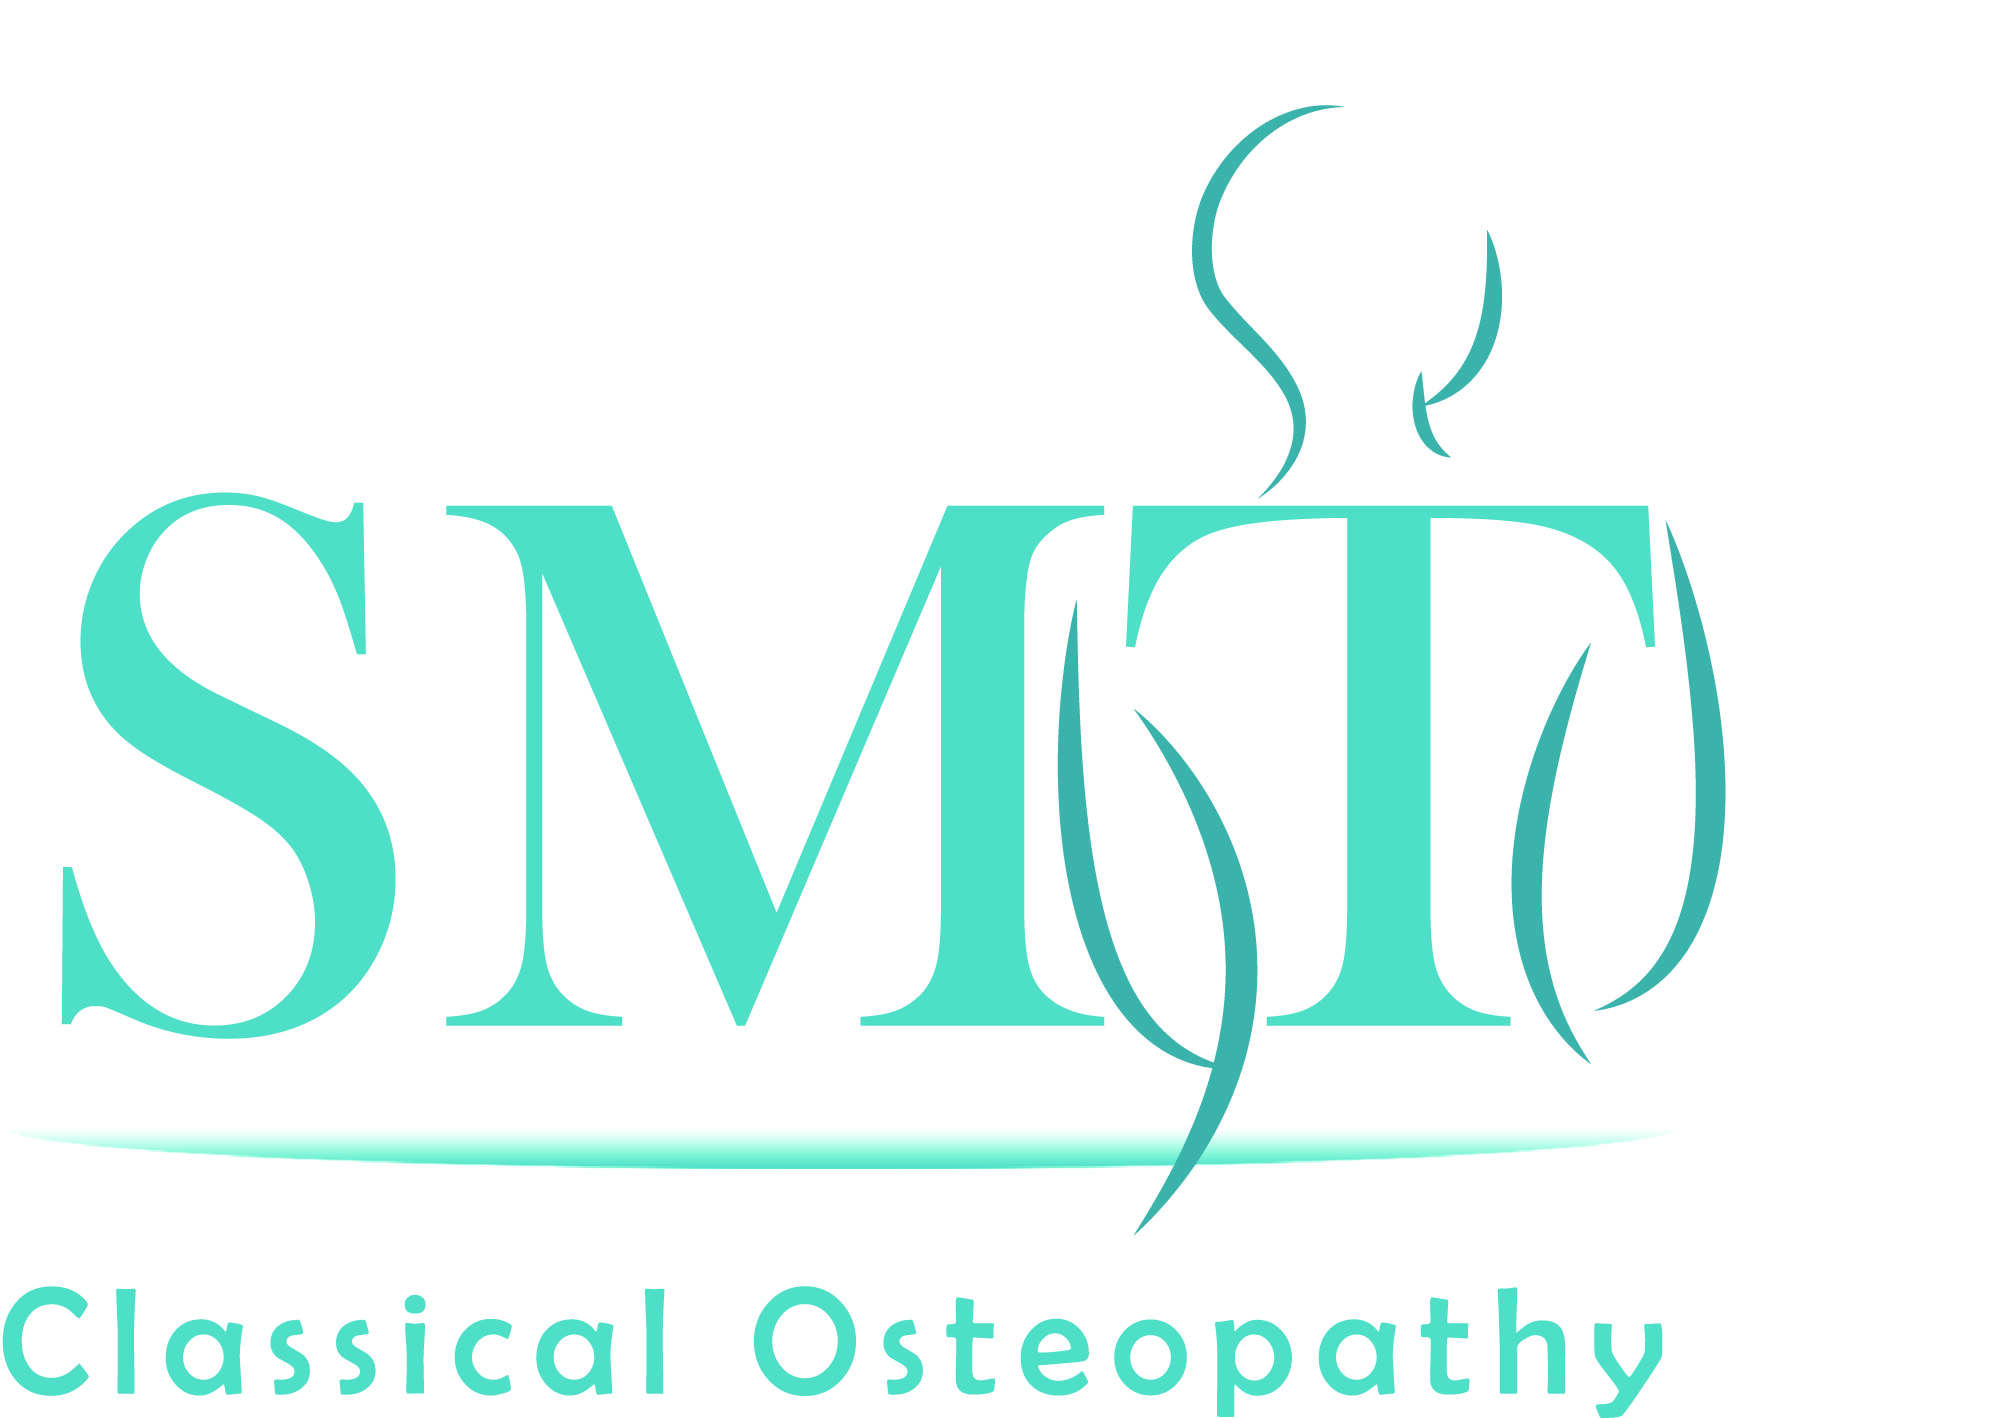 SMT Classical Osteopathy Inc.